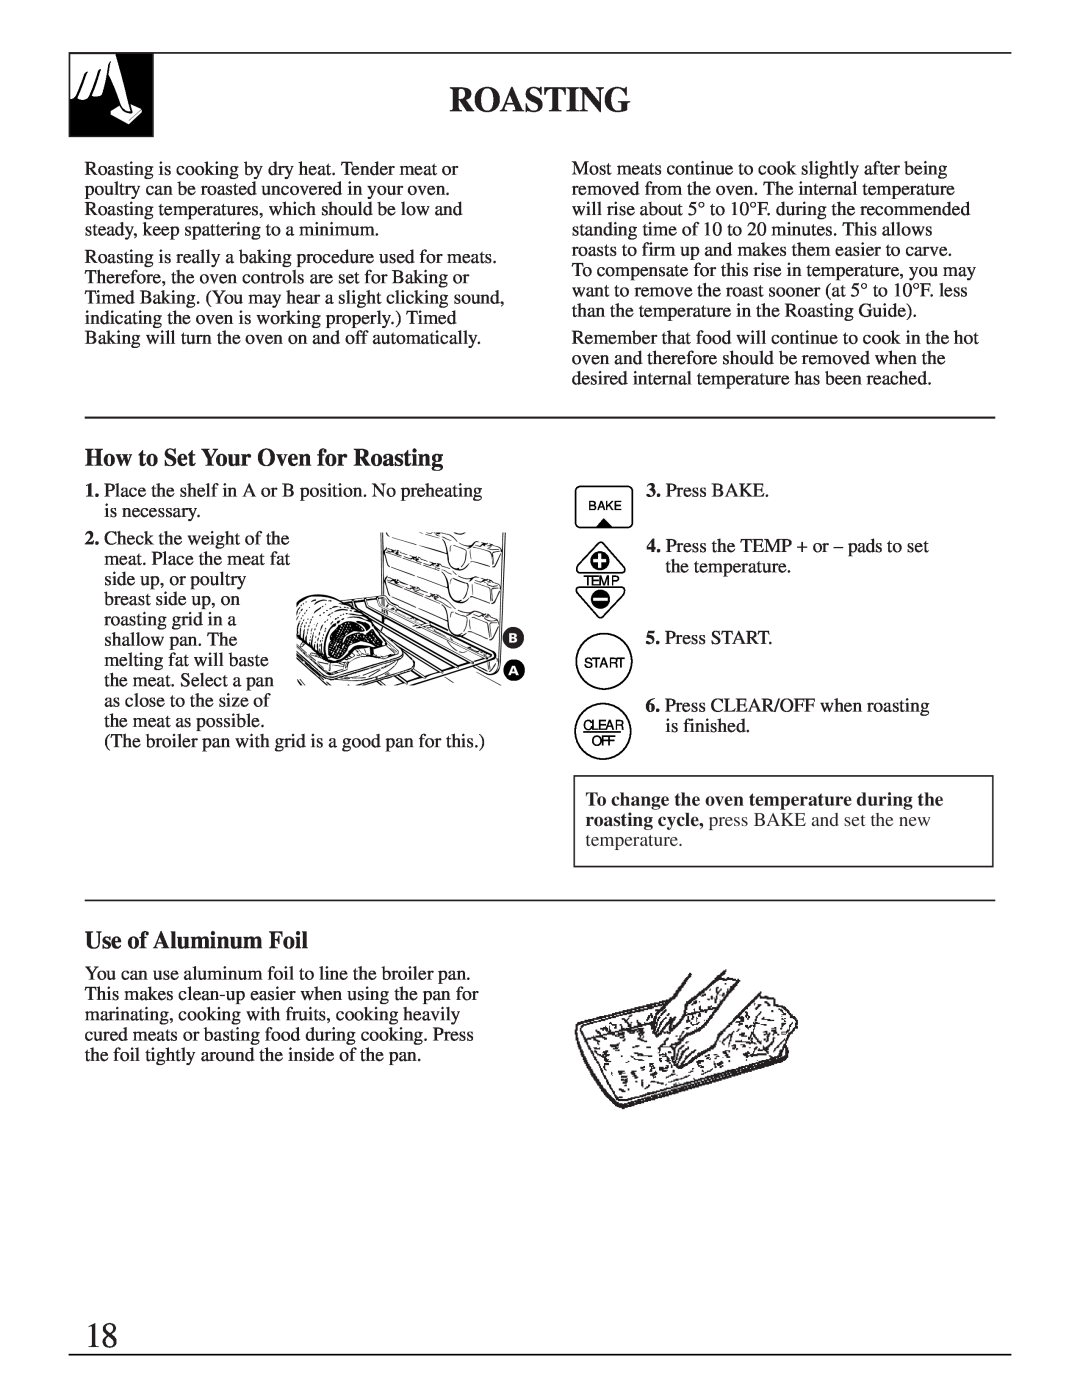 GE JGRS14 warranty How to Set Your Oven for Roasting, Use of Aluminum Foil 